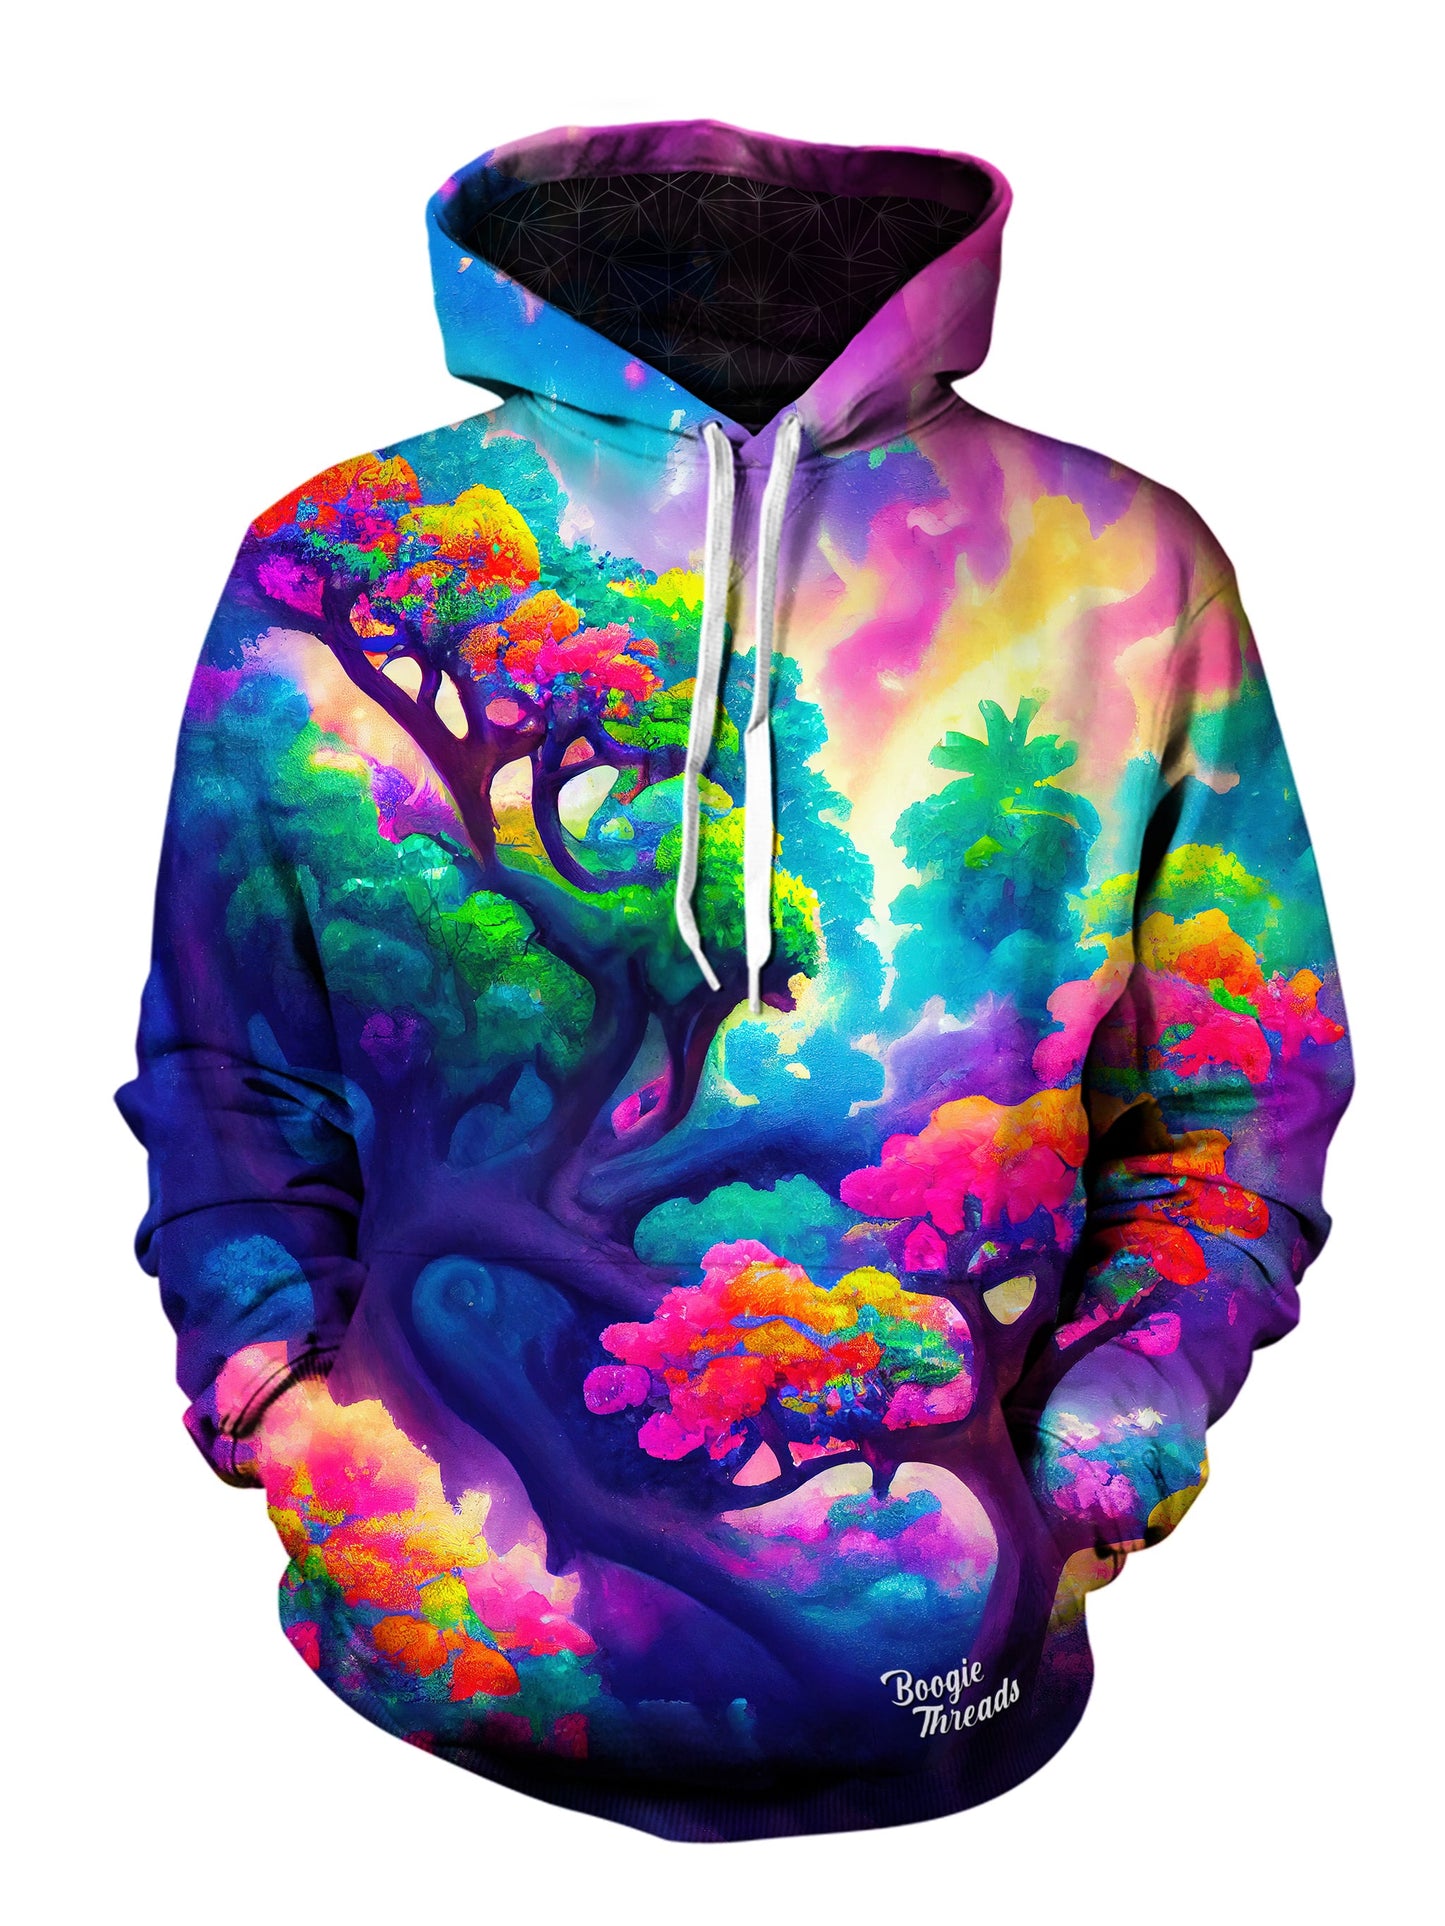 Storm Of Frailty Unisex Pullover Hoodie - EDM Festival Clothing - Boogie Threads